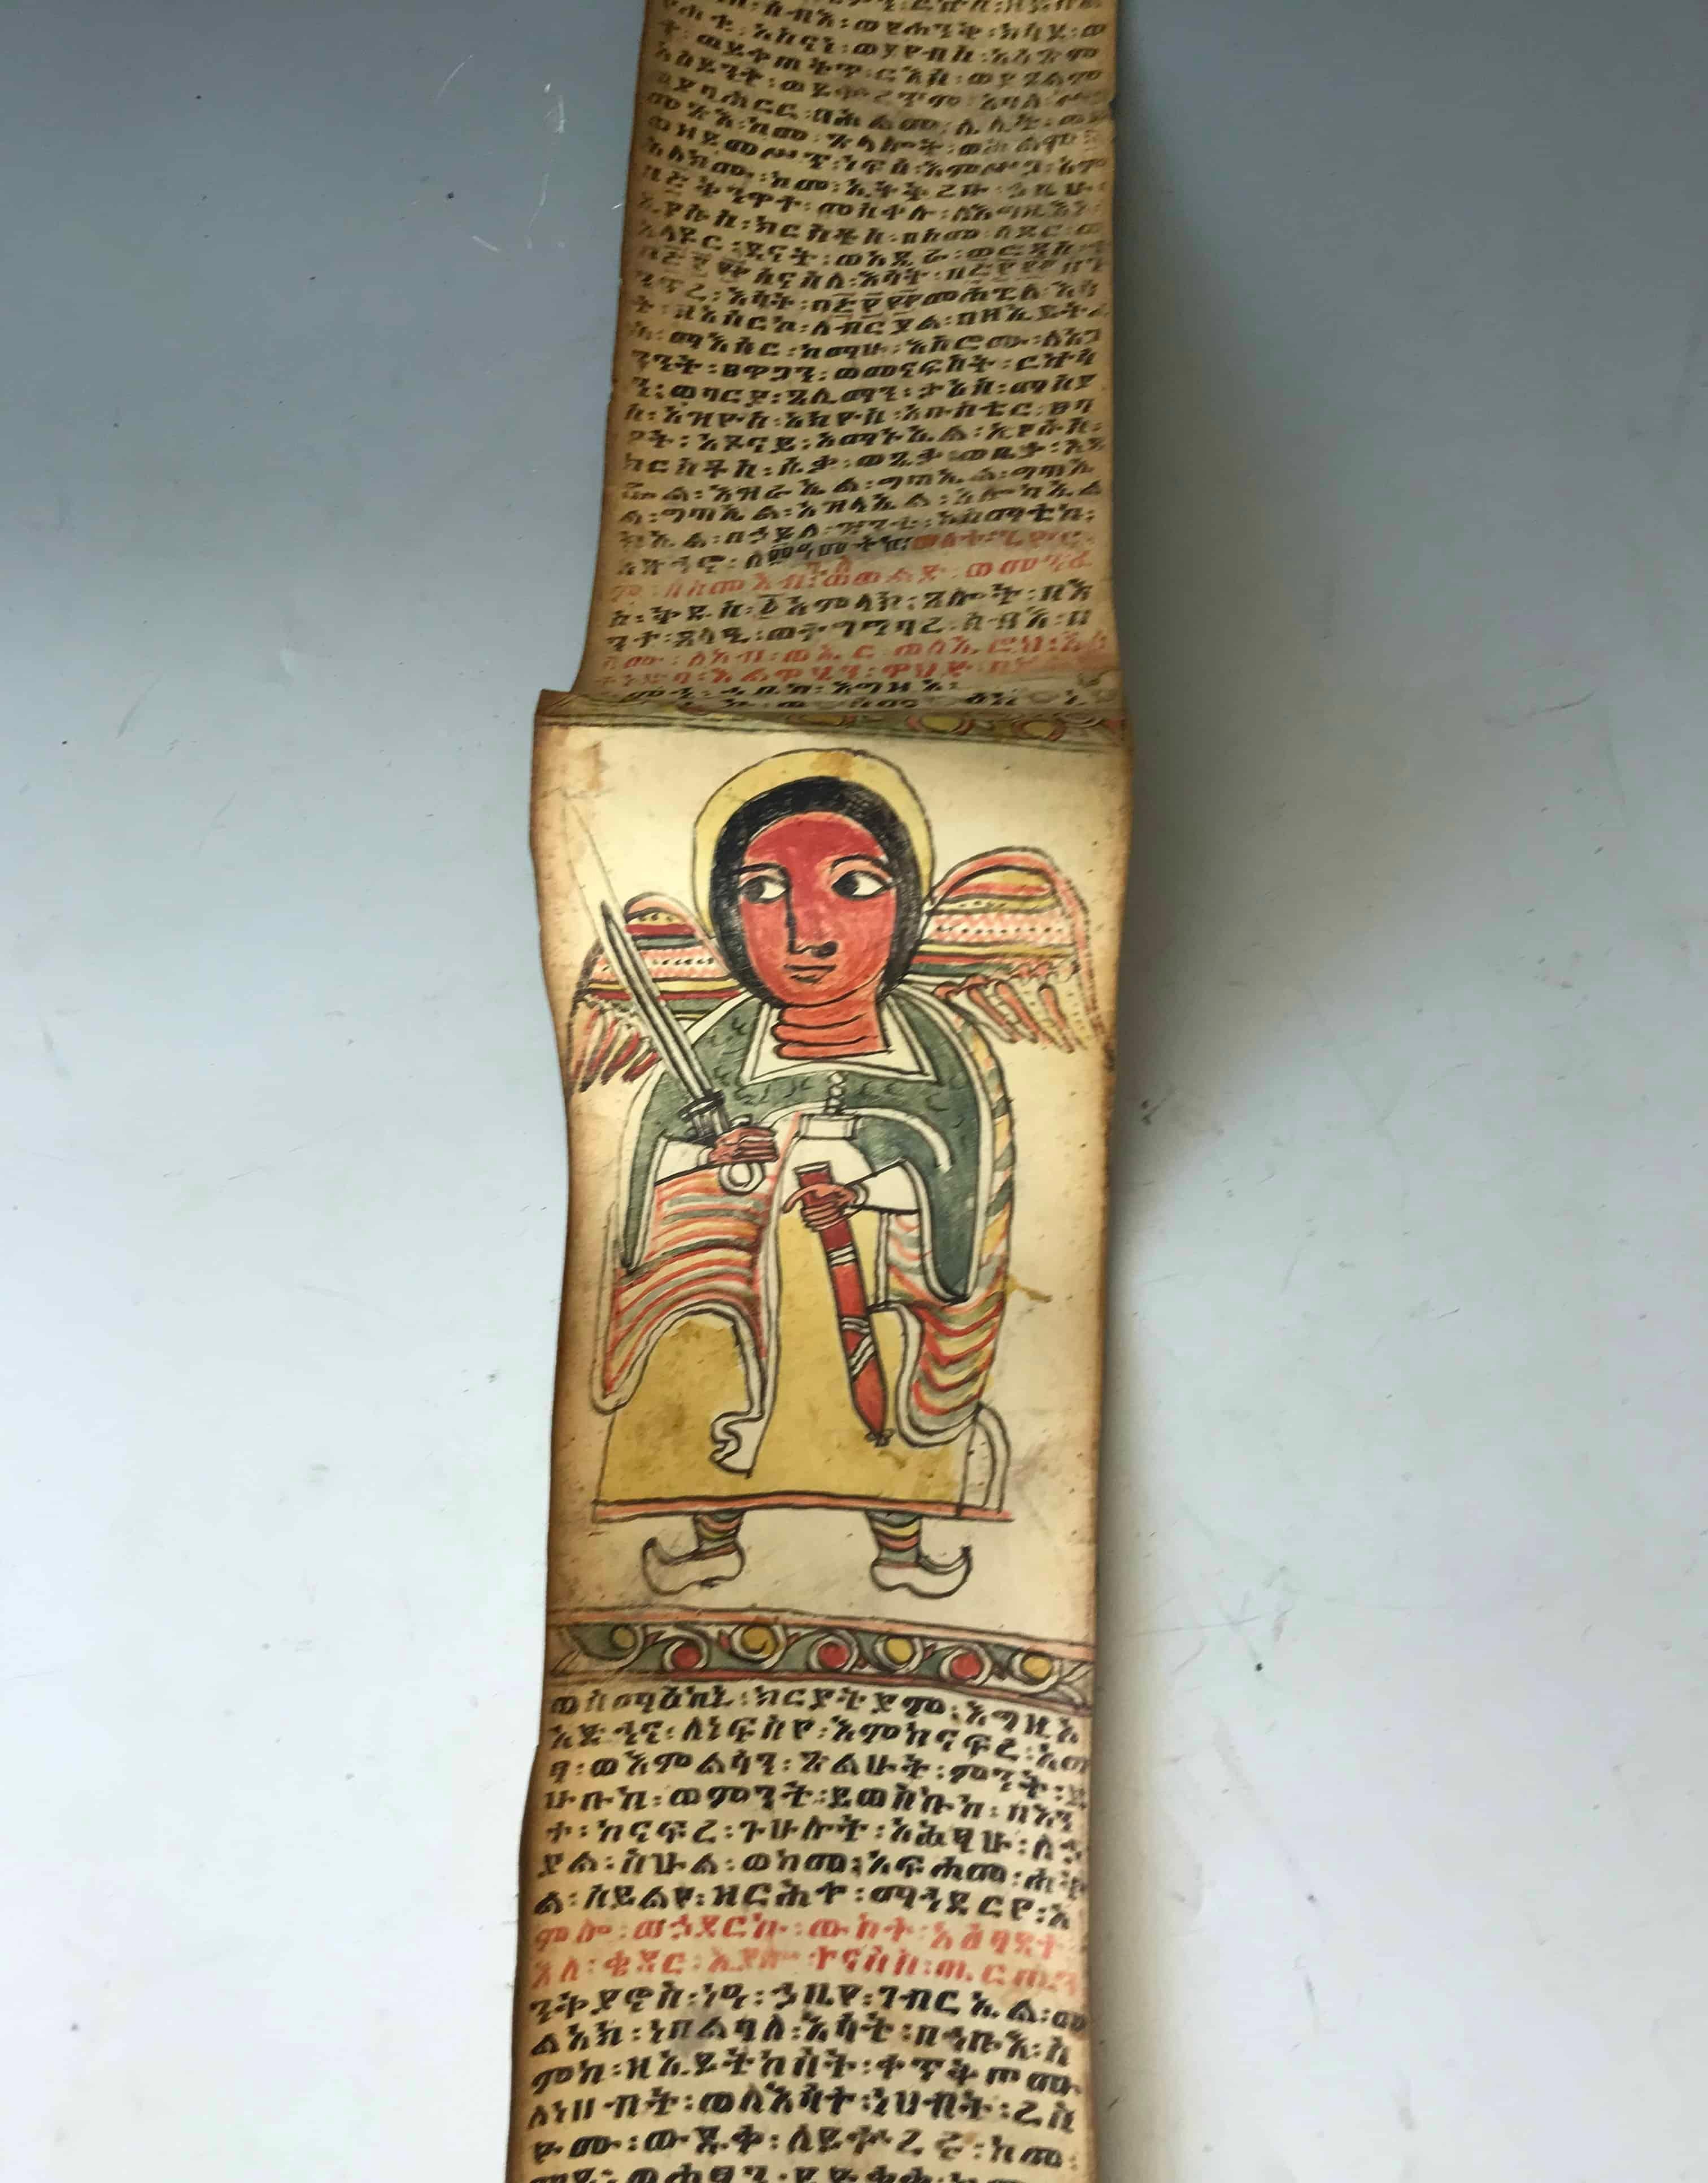 A antique illuminated Ethiopian coptic magic/healing scroll.

A traditional Coptic Christian scroll  painted on Animal sections of skin vellum sewn together in sections, the text is written in a ancient language called Ge`az  this scroll is